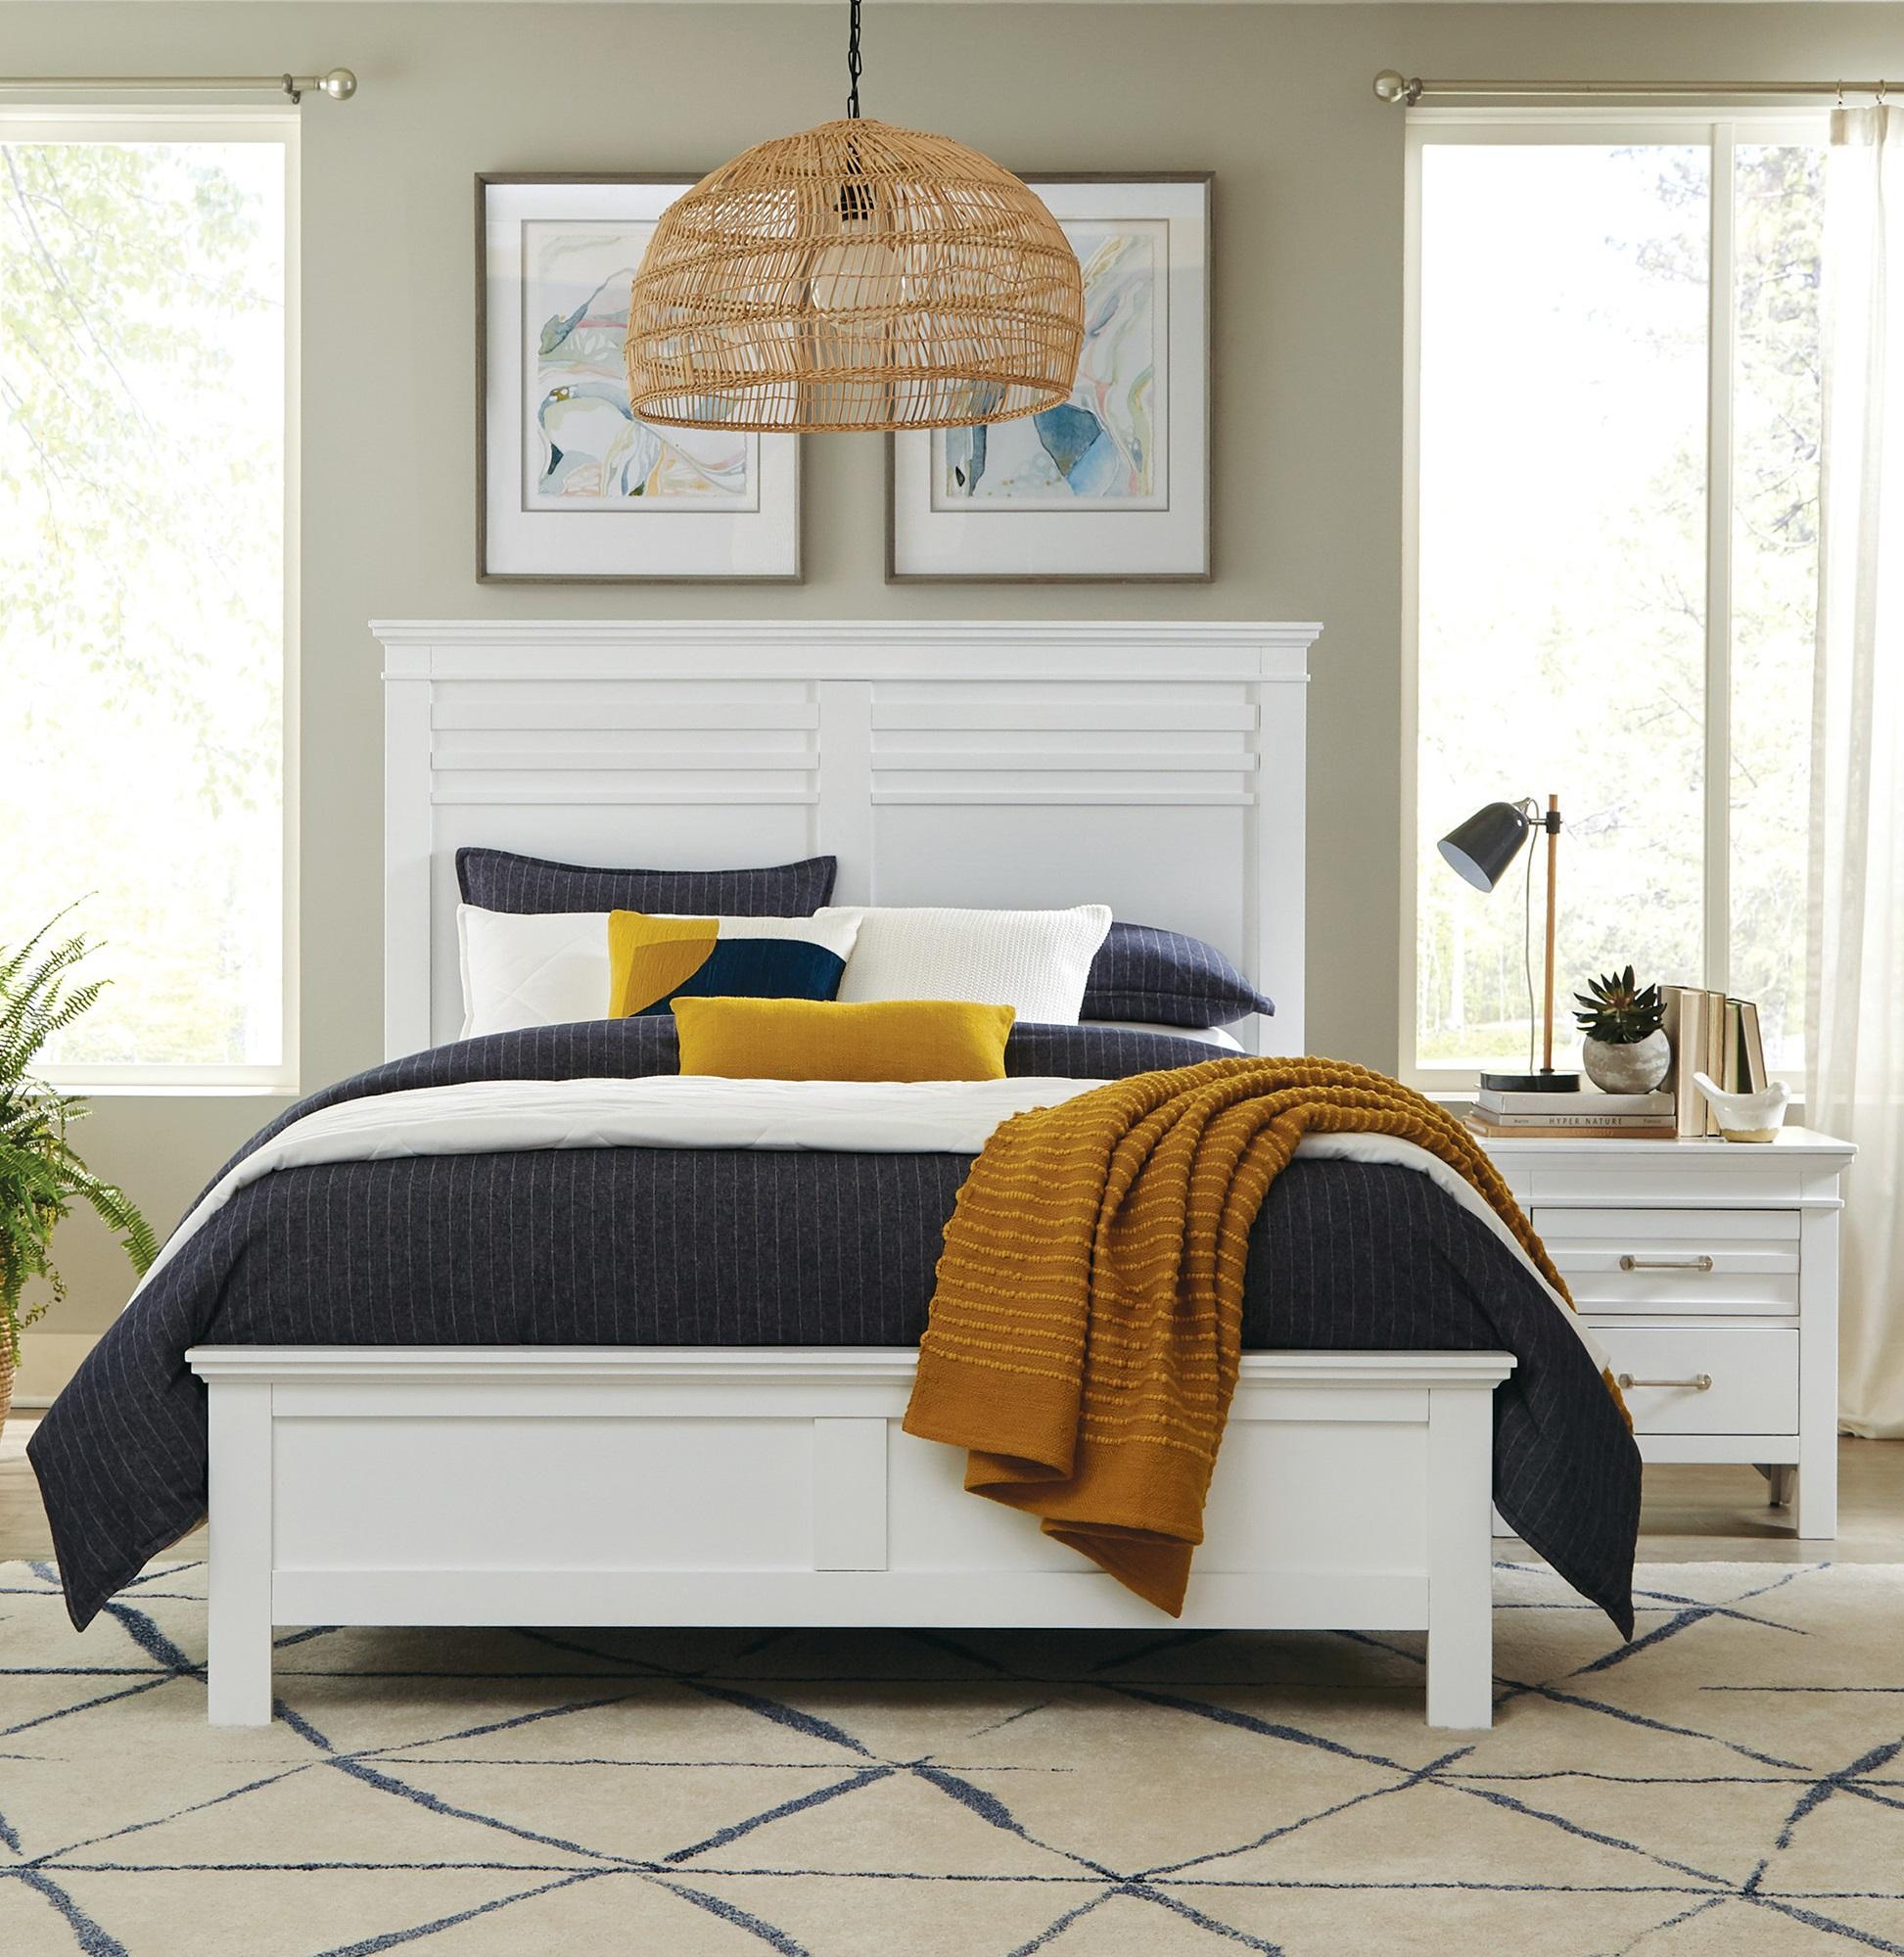 Transitional Bed and 2 Nightstands Set 1675WK-1EK*-3PC Blaire Farm 1675WK-1EK*-3PC in White 